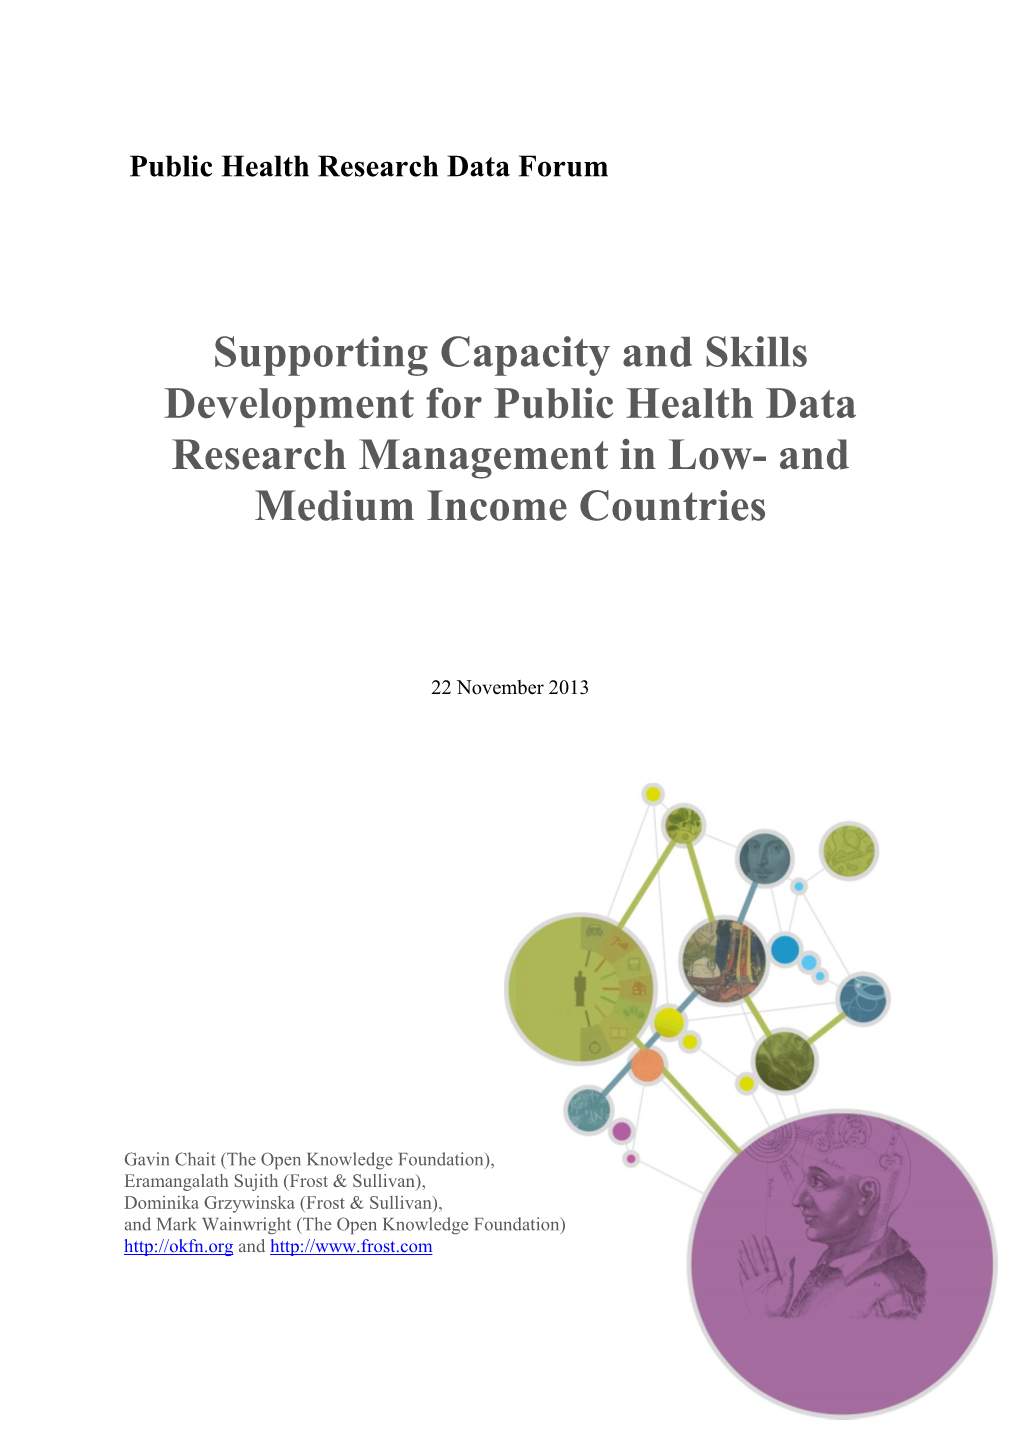 Supporting Capacity and Skills Development for Public Health Data Research Management in Low- and Medium Income Countries